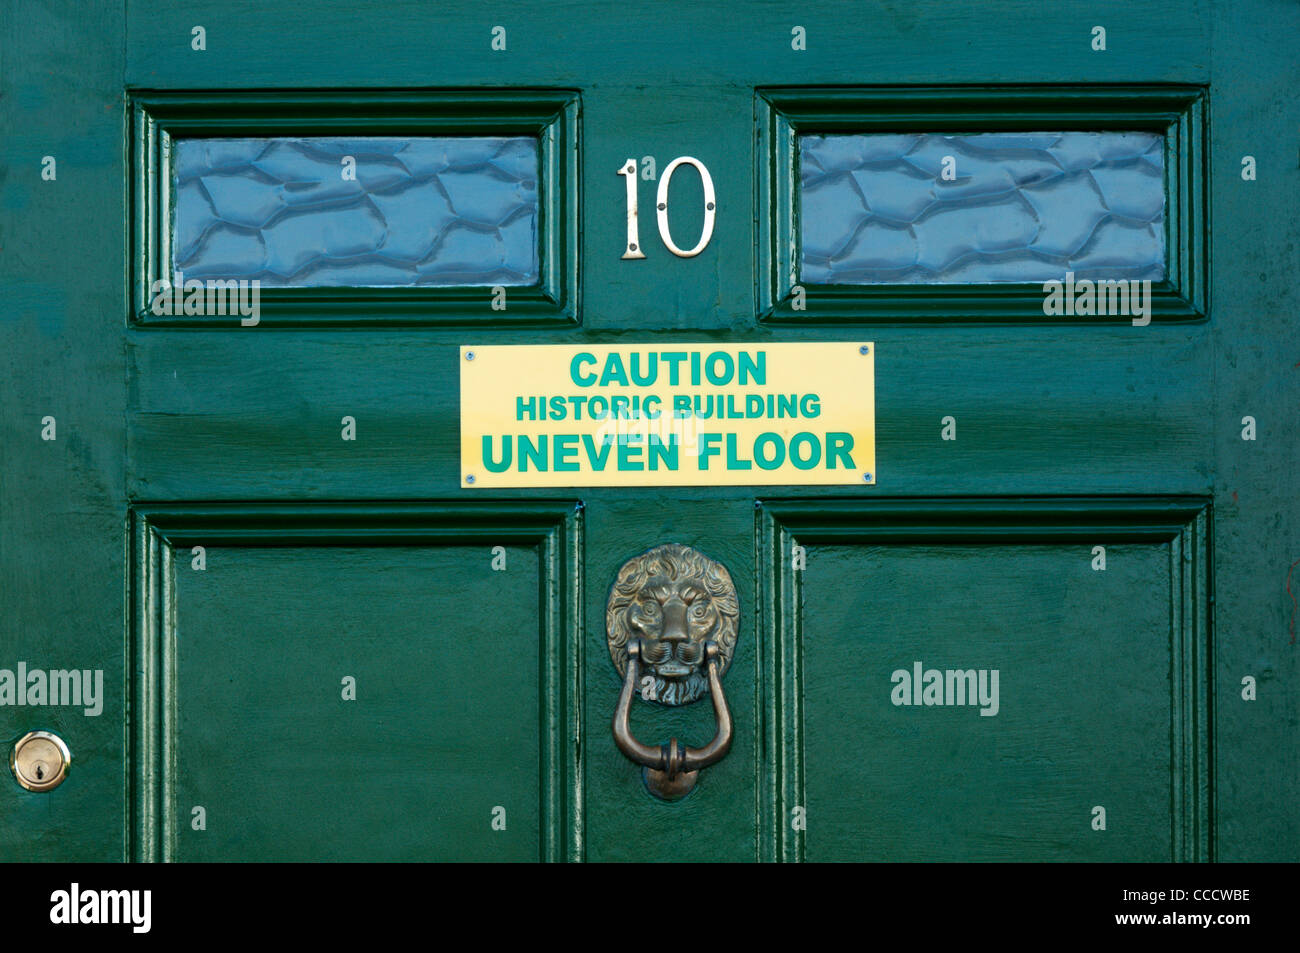 Sign on a green door warns of uneven floors in an old building. Stock Photo